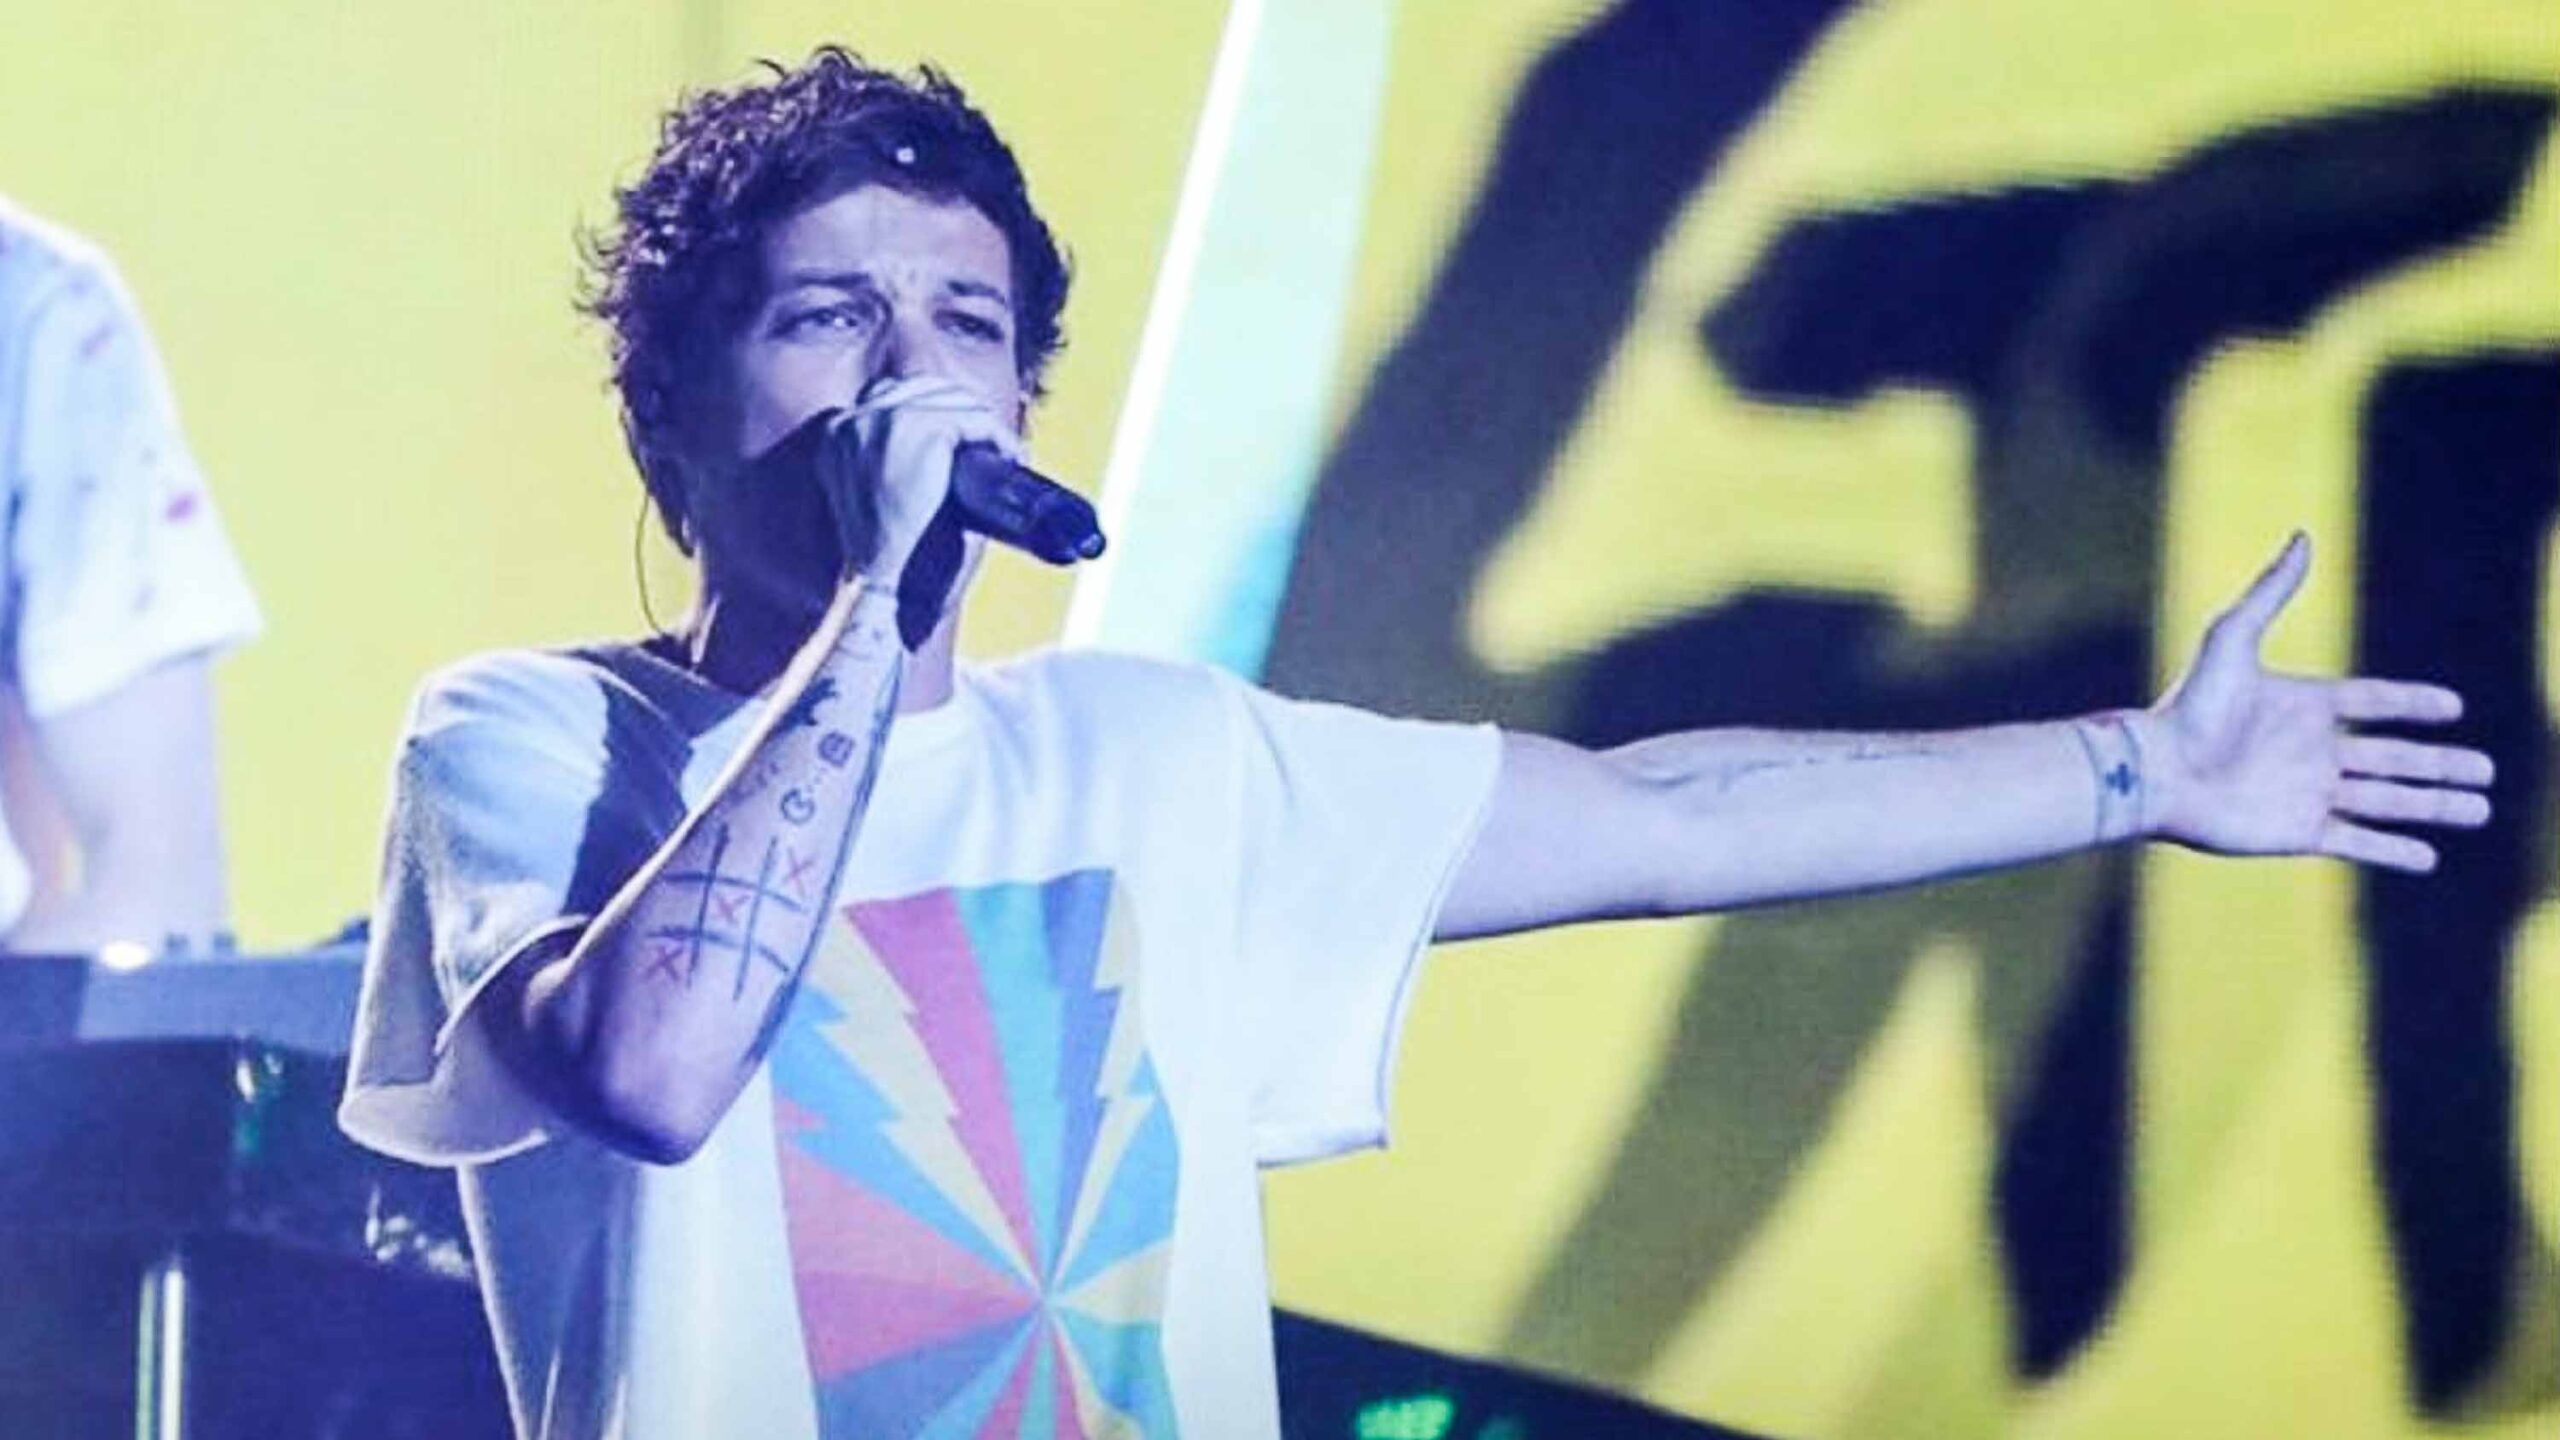 WATCH: Louis Tomlinson performs at ‘X Factor’ finals, days after mom’s death